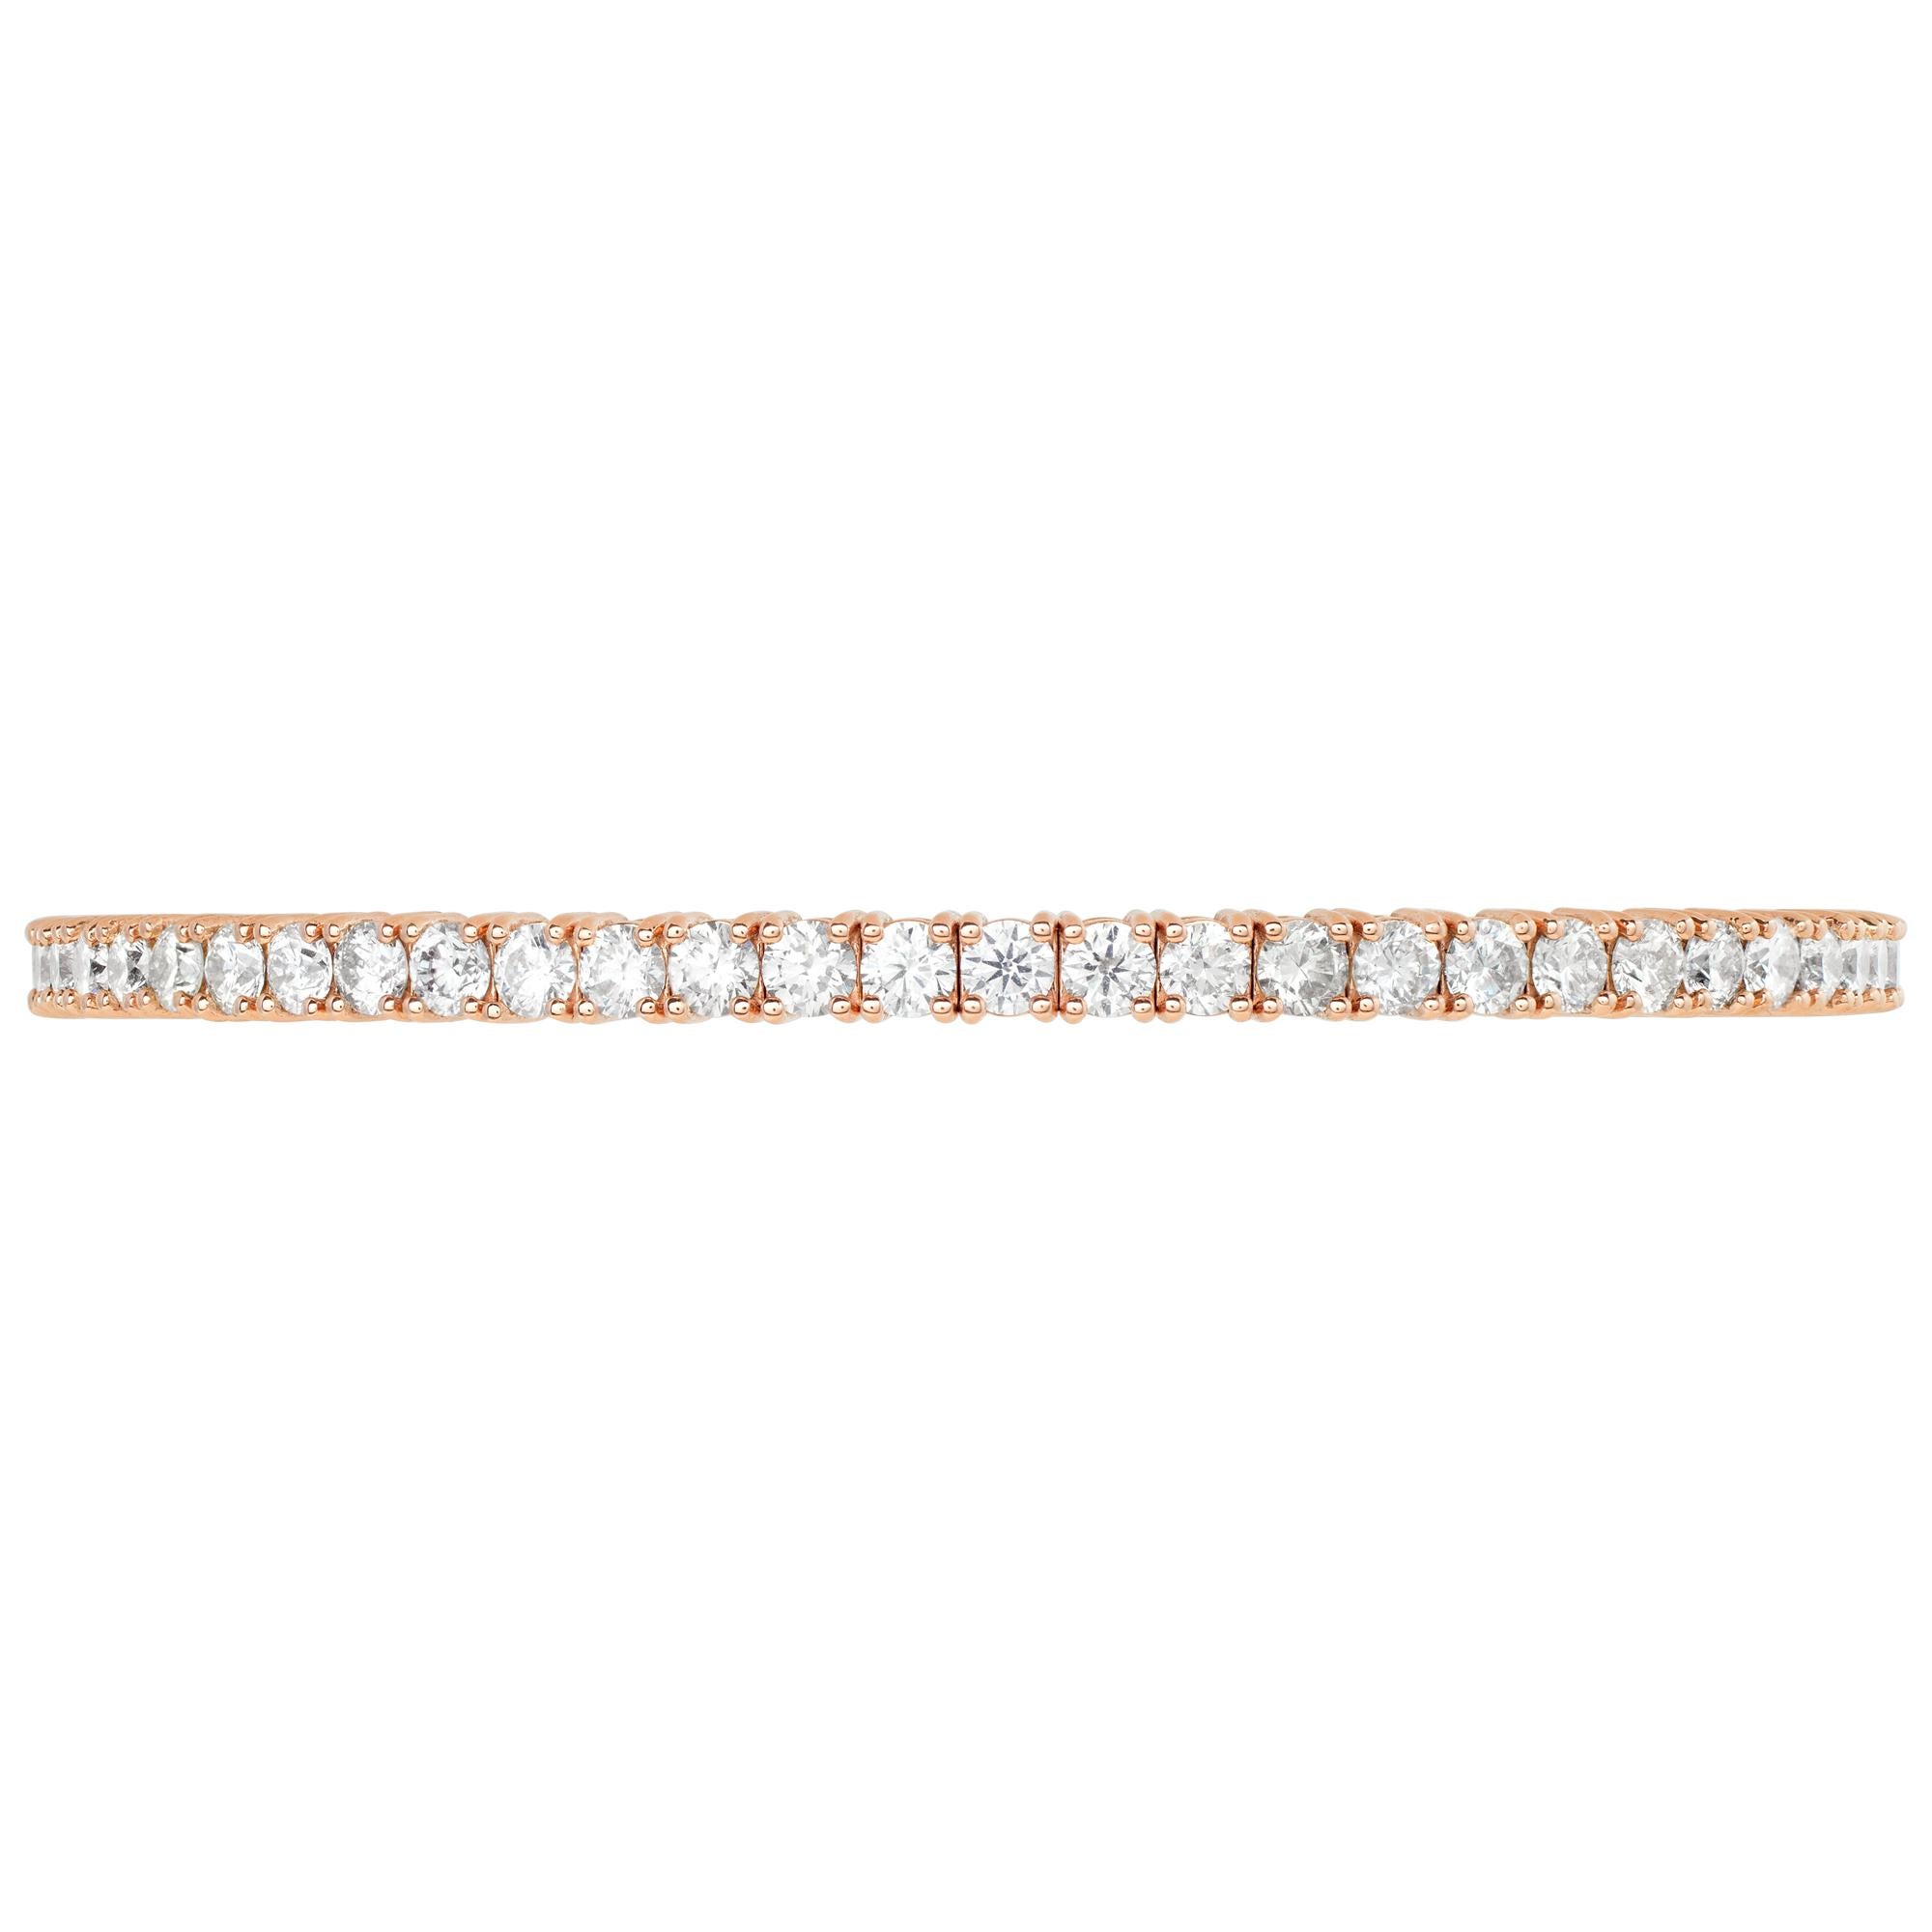 Flexible diamond line bangle bracelet  in 14k rose gold with approximately 6.25 carats in round diamonds (H-I color, SI clarity). 3.5 mm width.